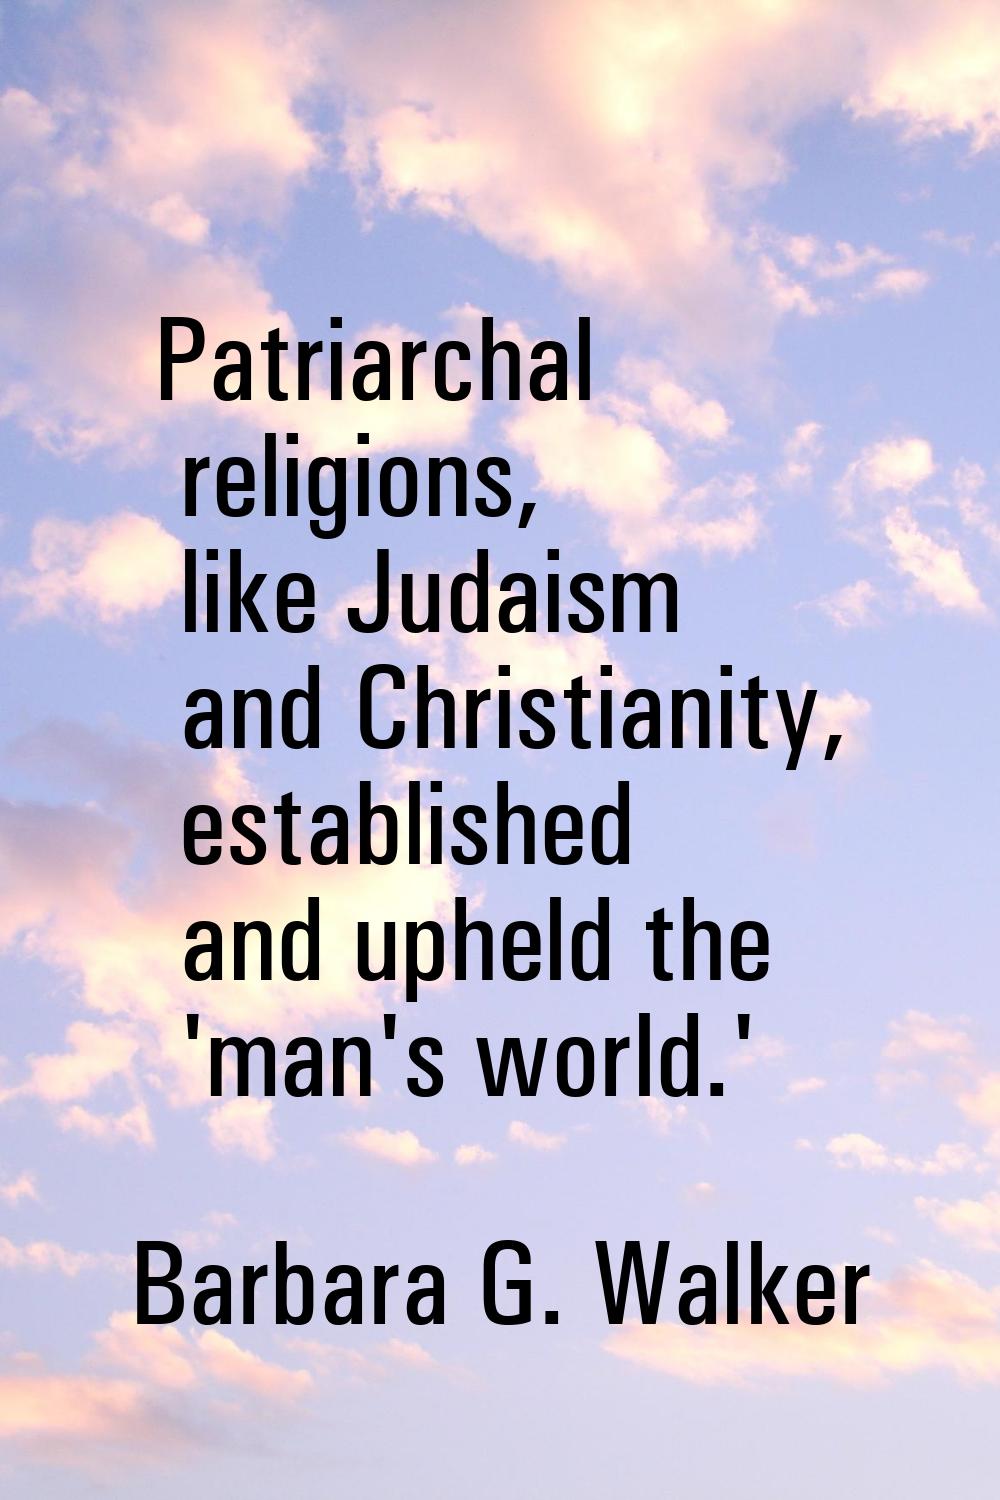 Patriarchal religions, like Judaism and Christianity, established and upheld the 'man's world.'